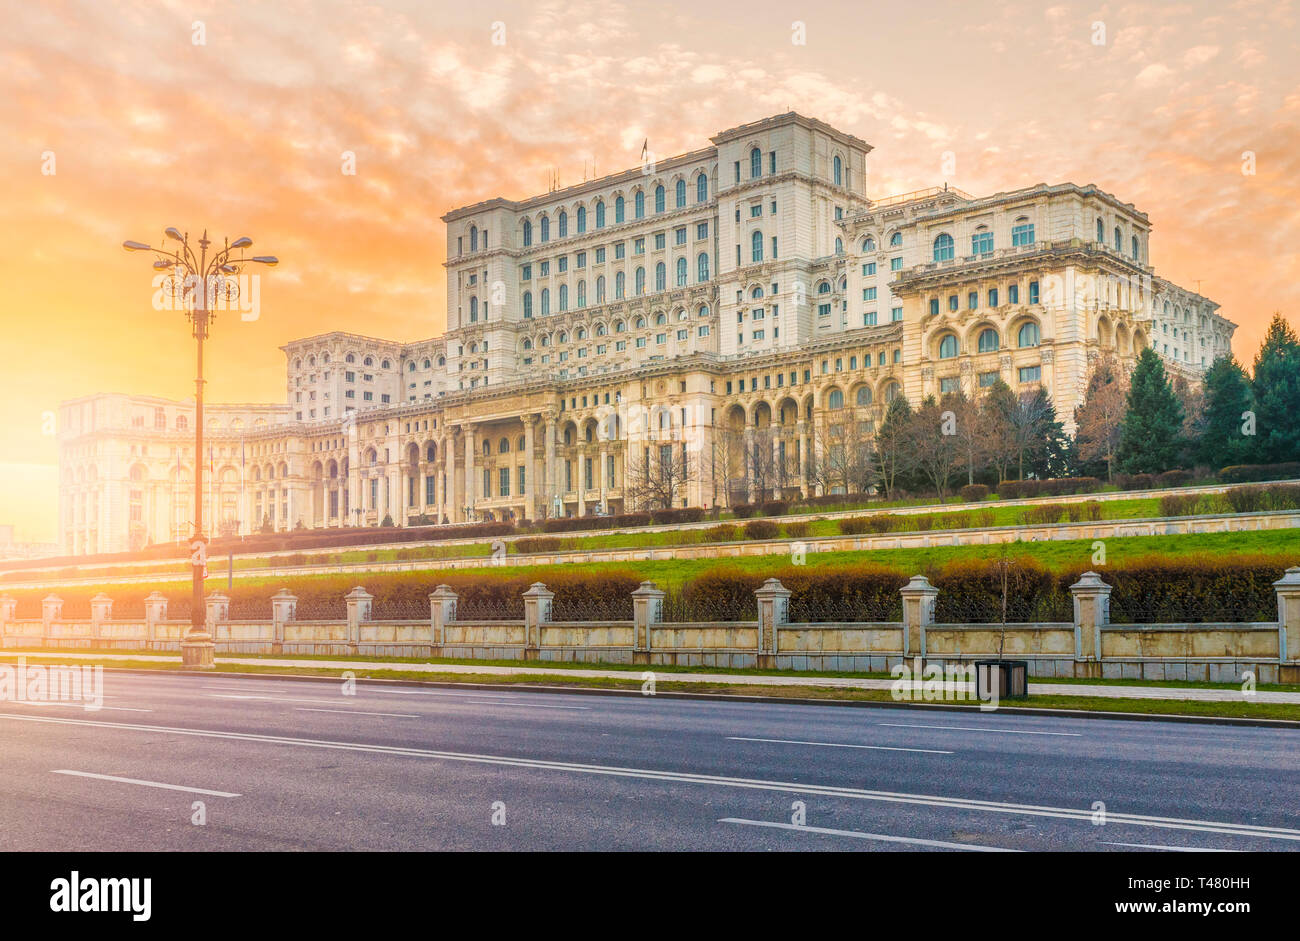 The Palace of the Parliament at sunset time, Bucharest, Romania. Stock Photo